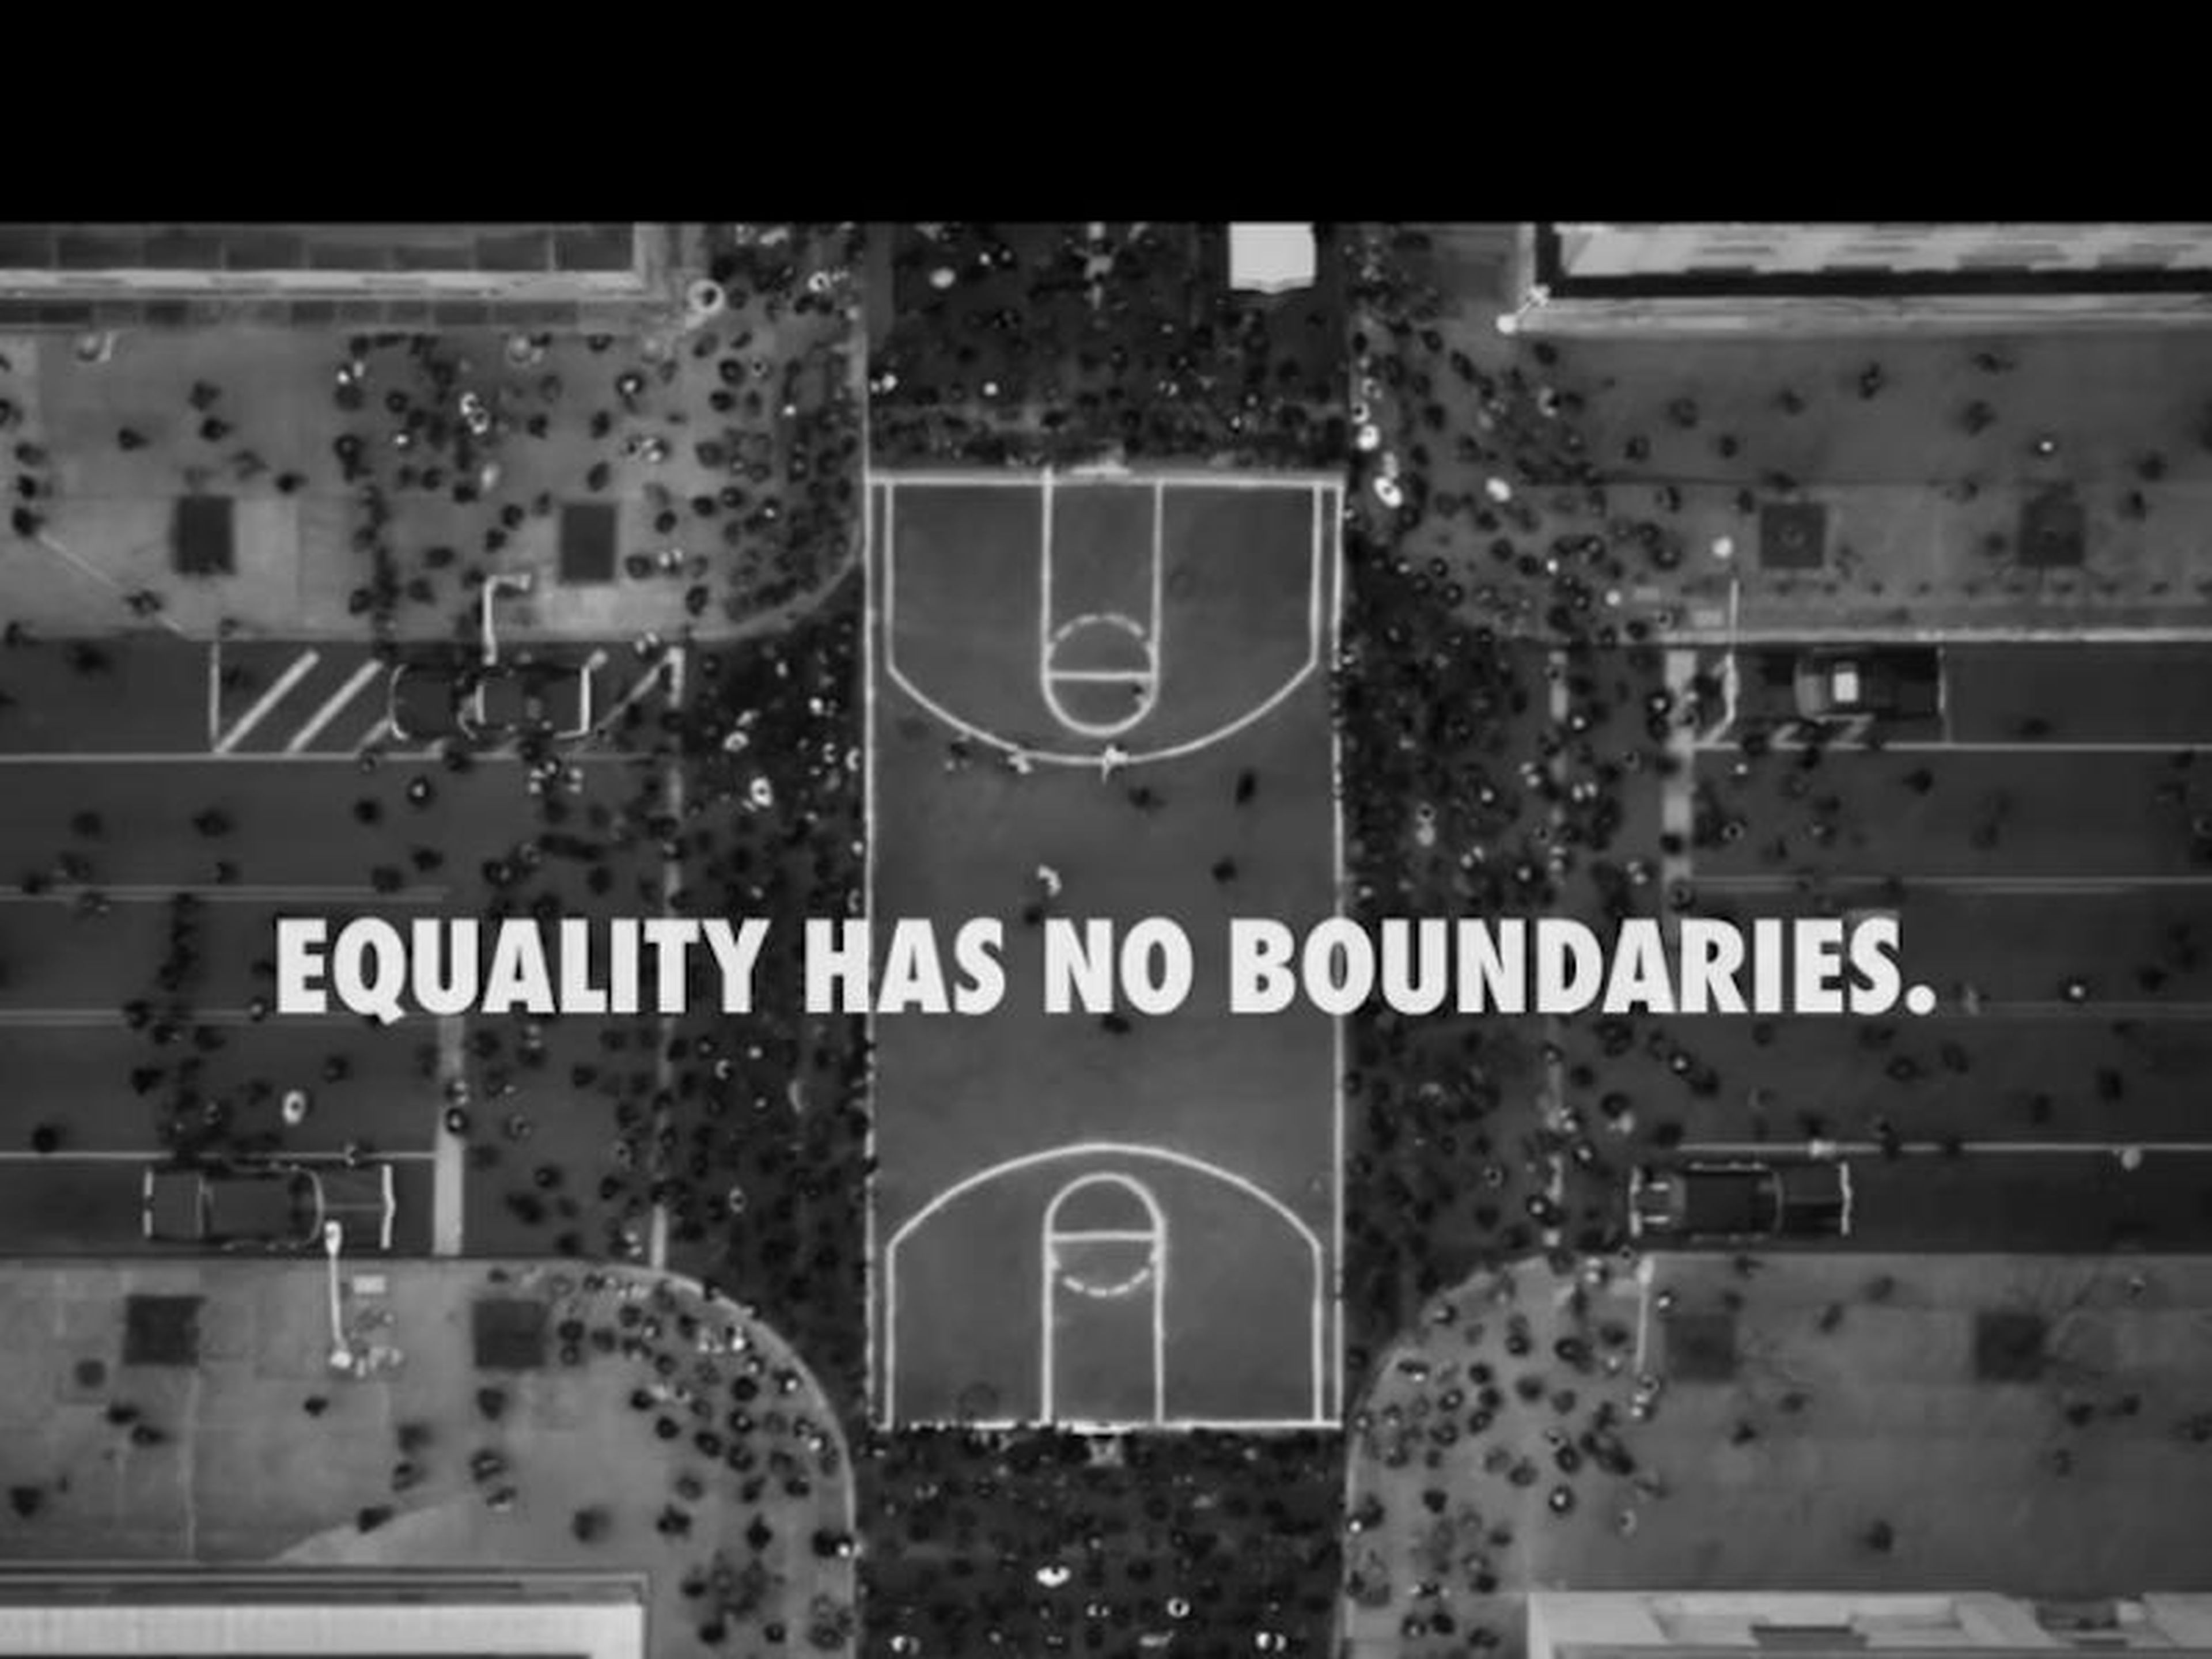 Nike's 2017 "Equality" campaign featured black athletes like LeBron James, Serena Williams, Gabby Douglas, and Kevin Durant, along with actor Michael B. Jordan talking of the parallels between equality in sports and equality in